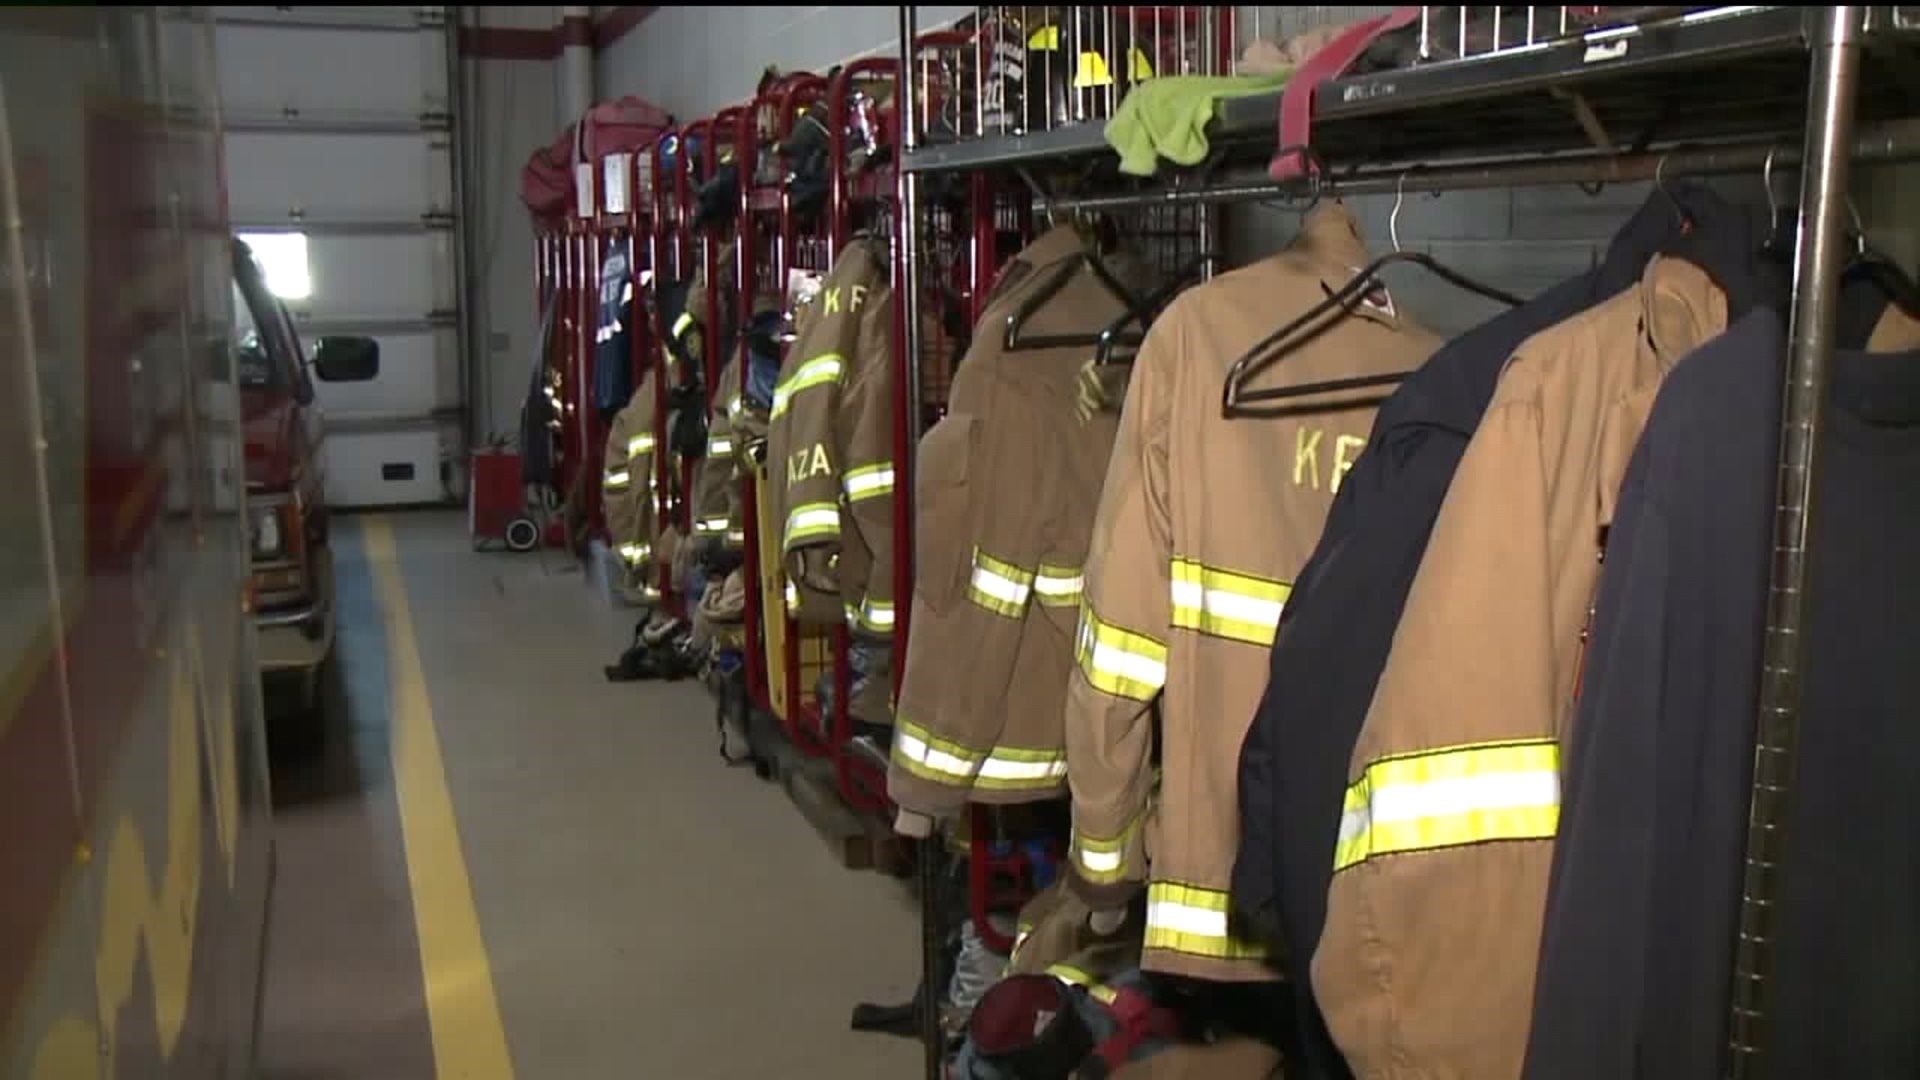 State Grant Money for Fire Safety and Equipment